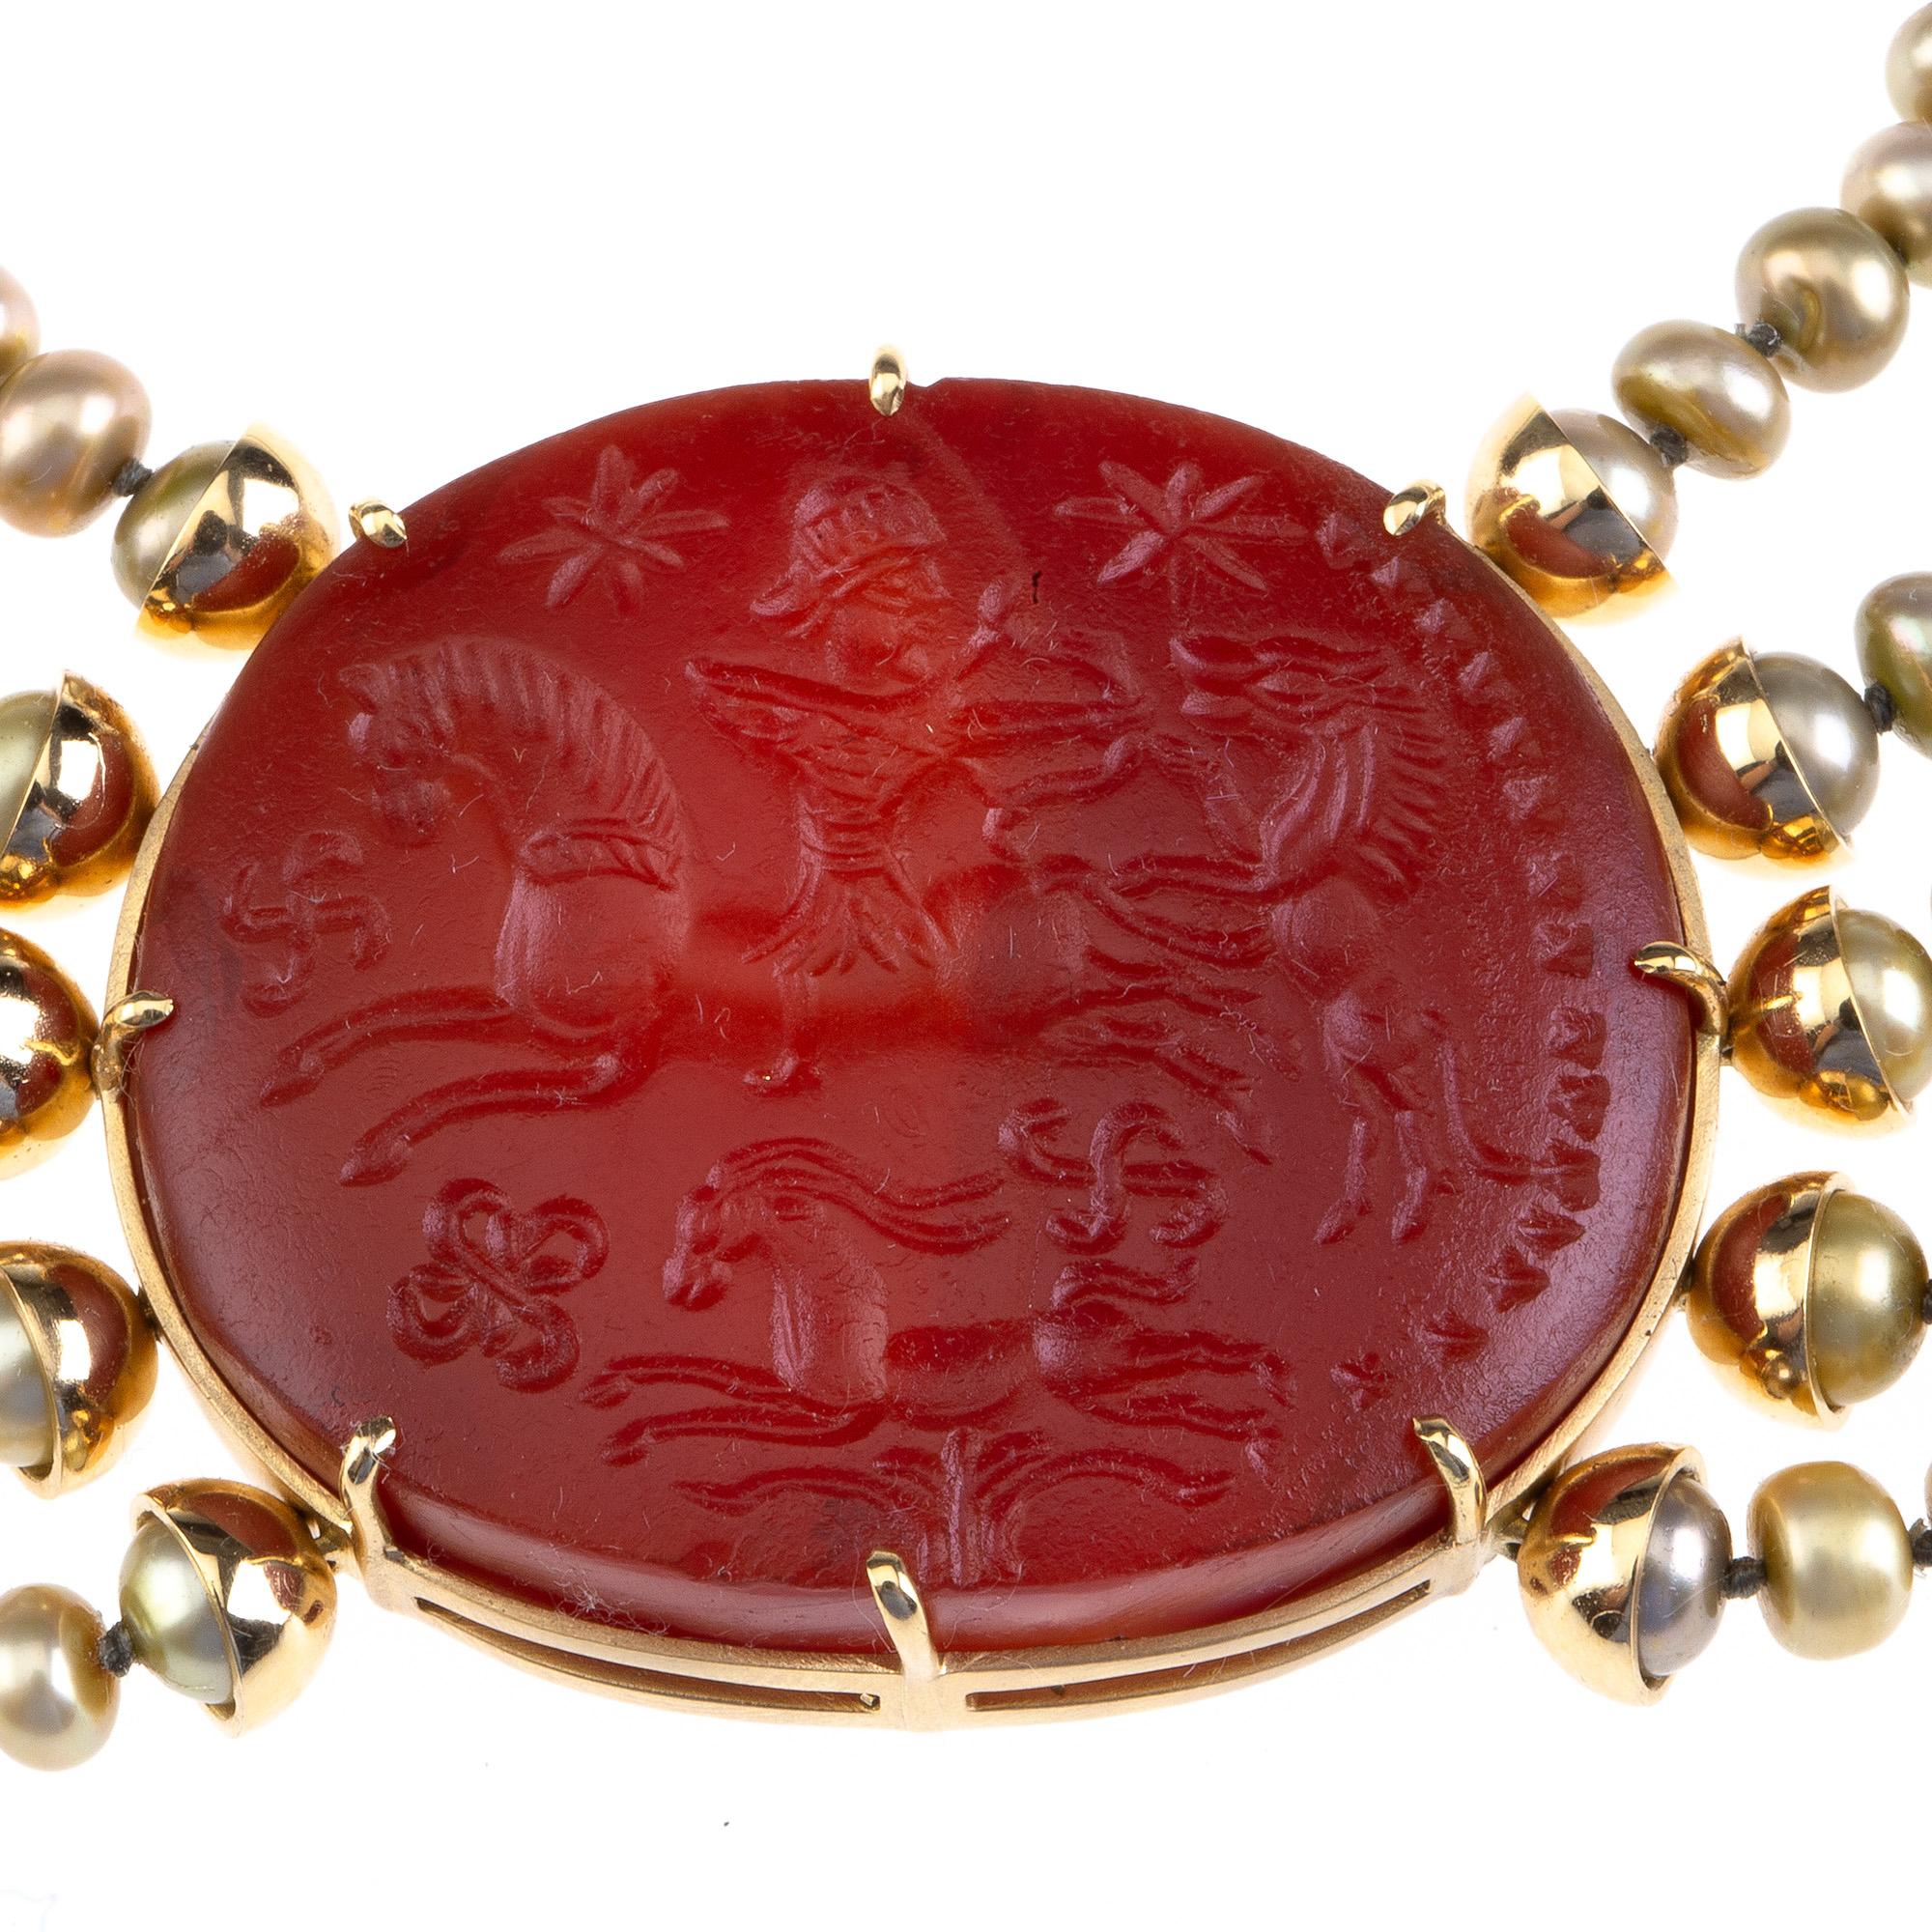 Rare antiques  carved agate 18k Gold gr 23,50 fresh water pearls adjustable necklace.
All Giulia Colussi jewelry is new and has never been previously owned or worn. Each item will arrive at your door beautifully gift wrapped in our boxes, put inside